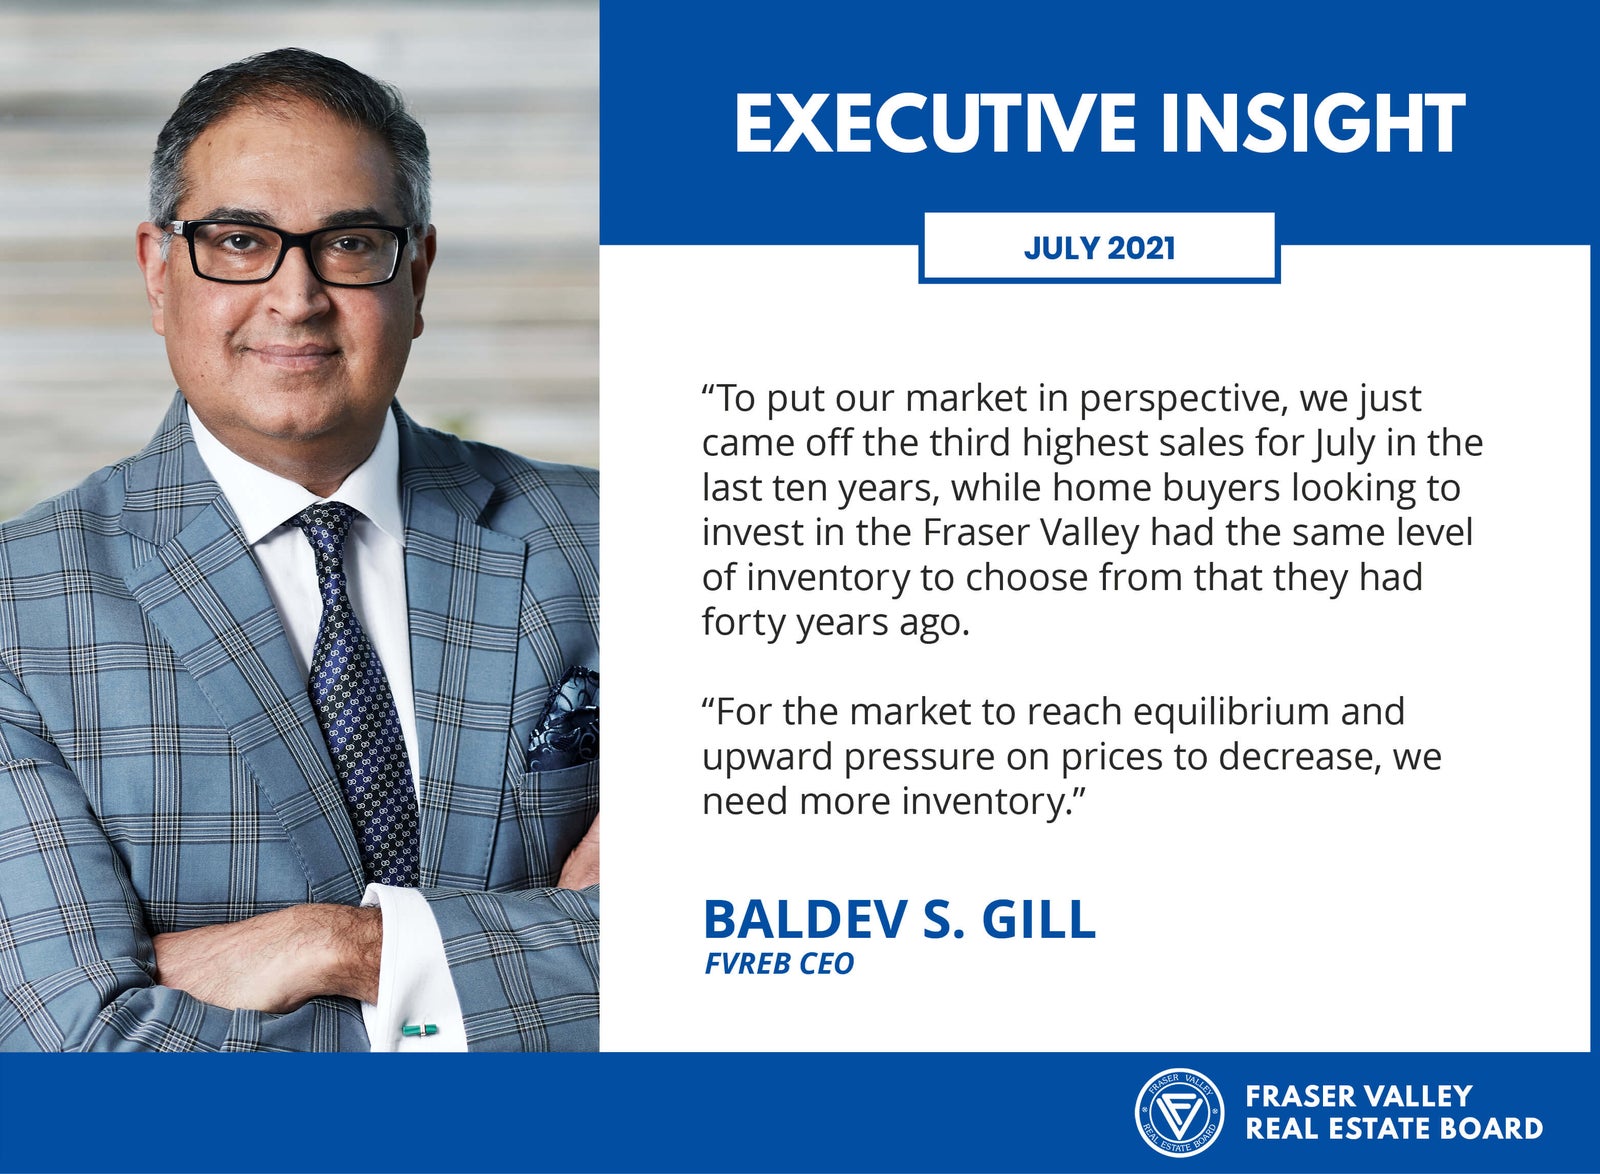 FVREB - Executive Insight for July 2021